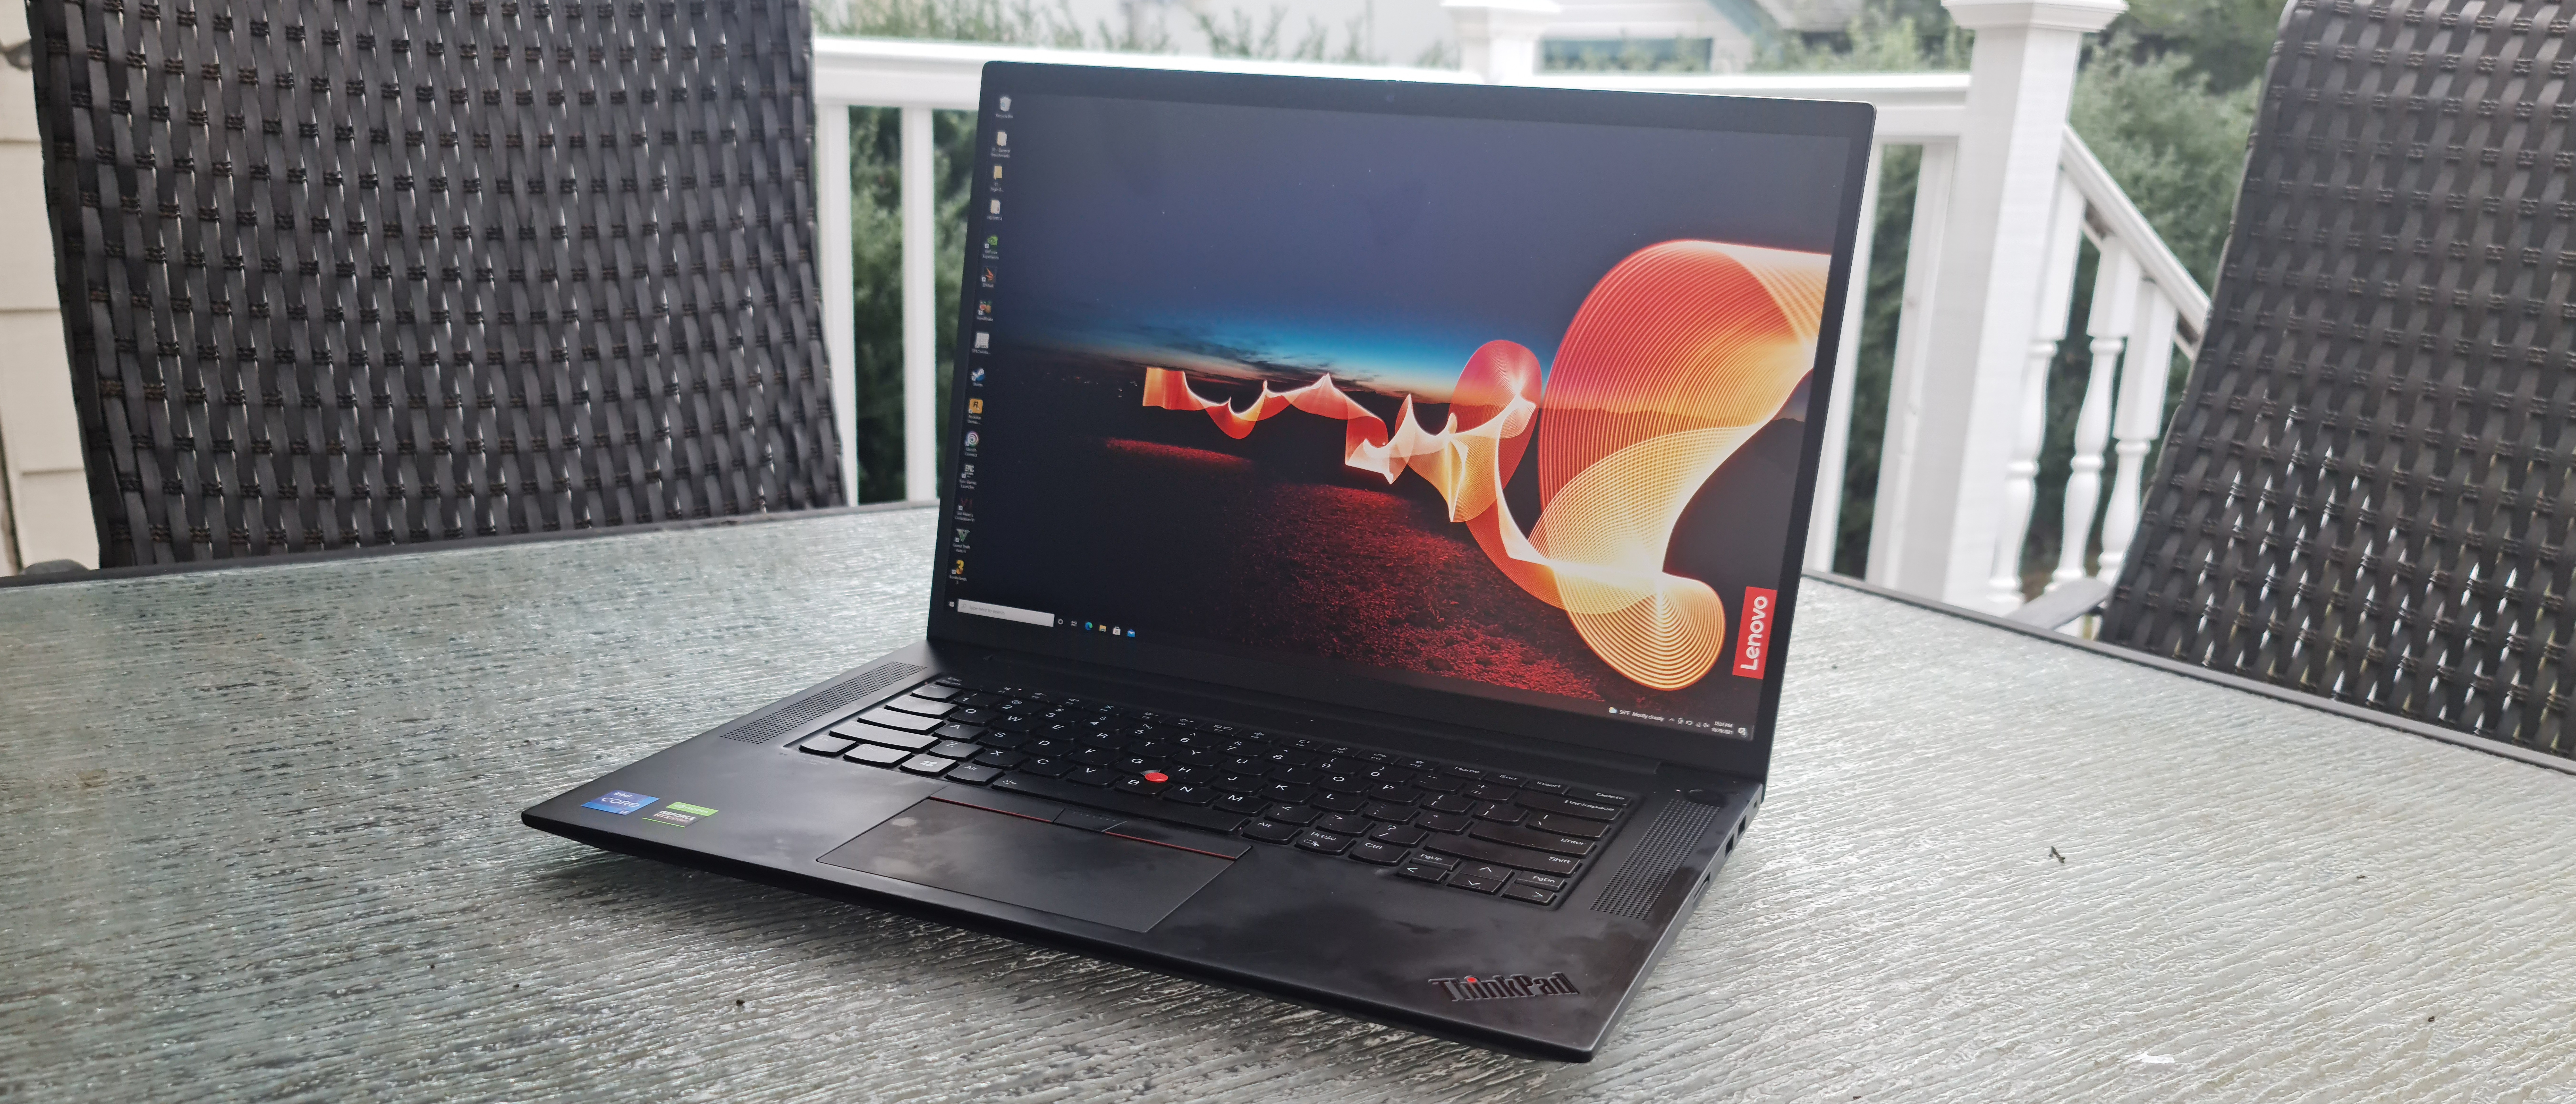 Lenovo ThinkPad X1 Extreme Gen 4 review: Is it better than the Dell XPS 15?  | Laptop Mag